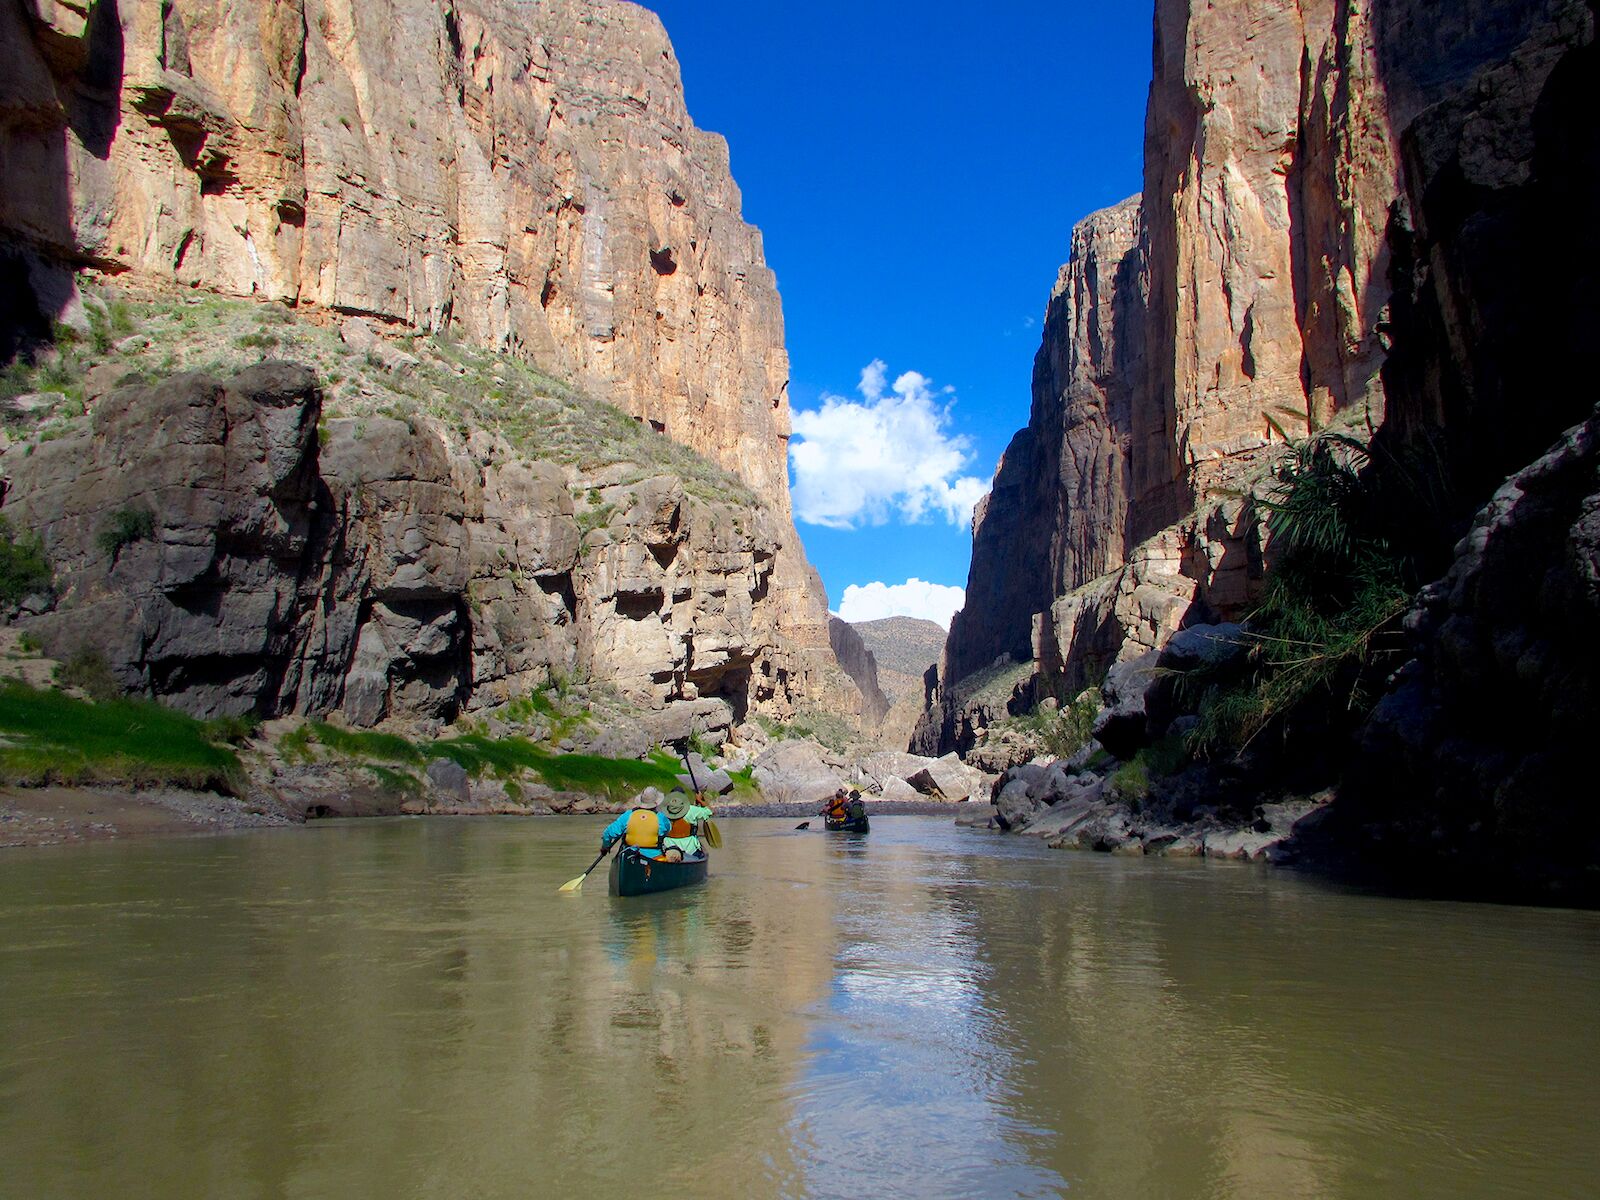 Rafting on Mariscal Canyon, a 10-mile canyon in the national park